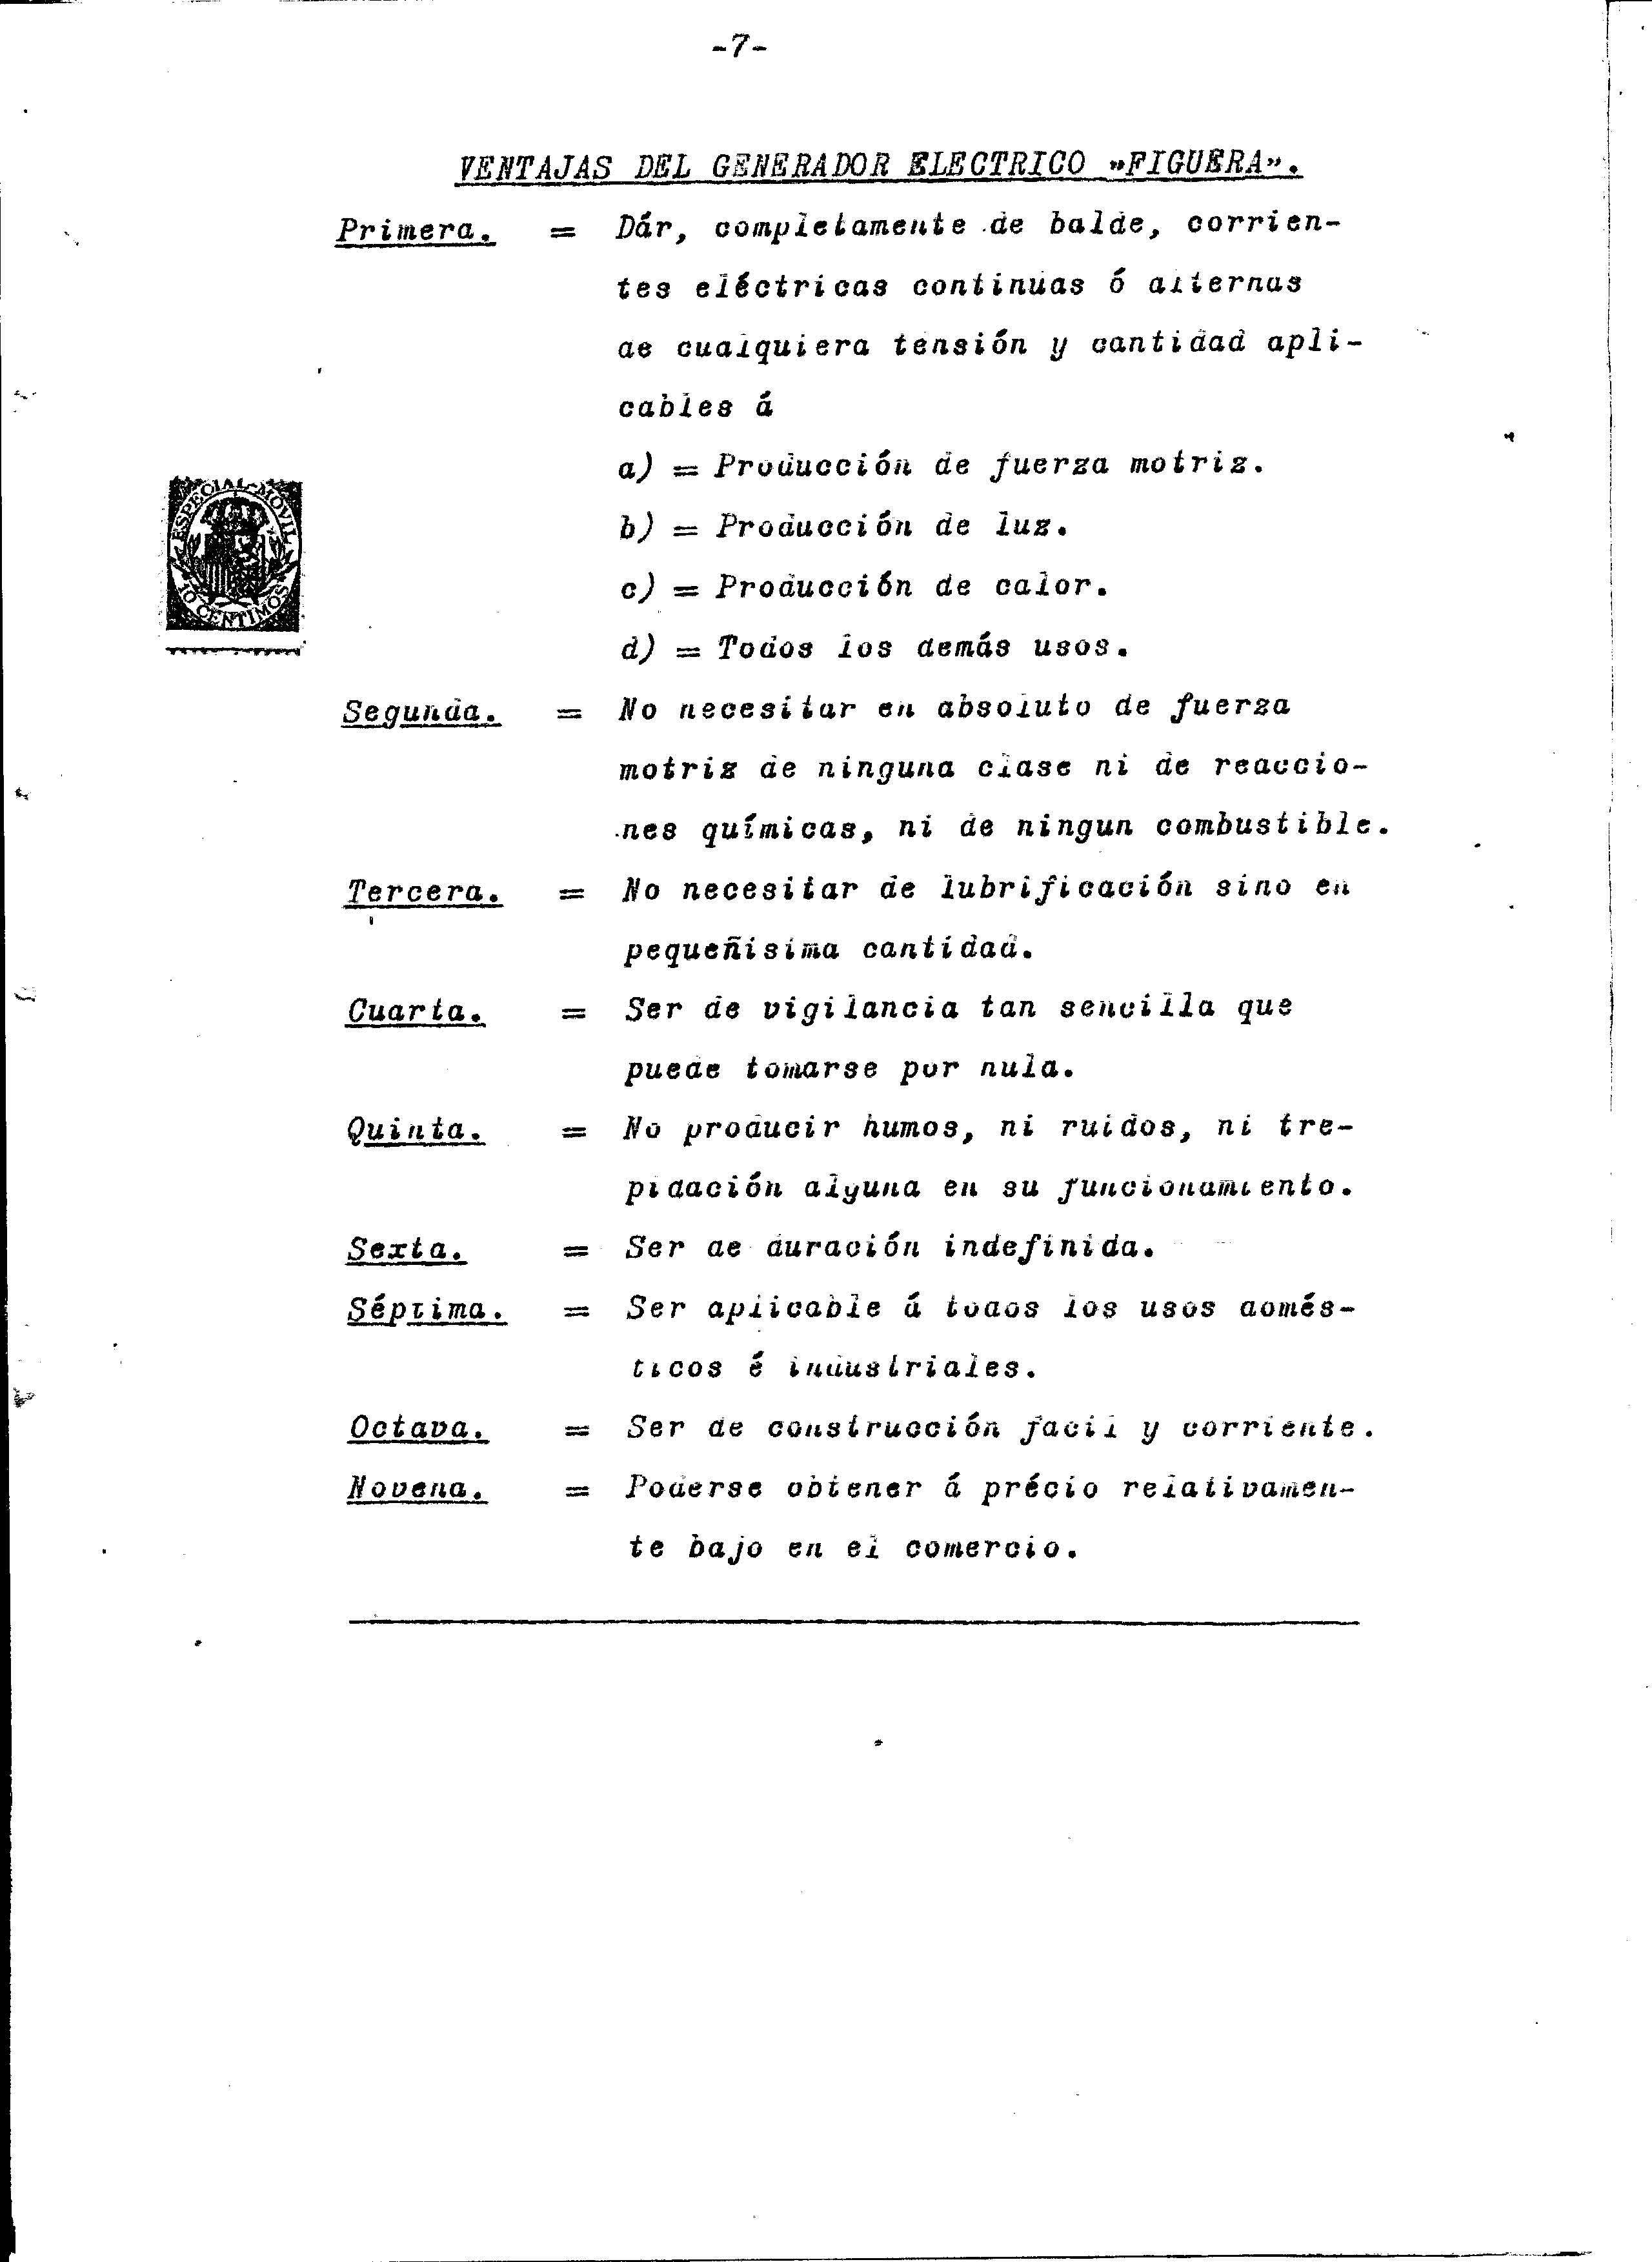 Clemente Figuera Patente 1908_Num_44267_scanned_OCR_Page_08.jpg